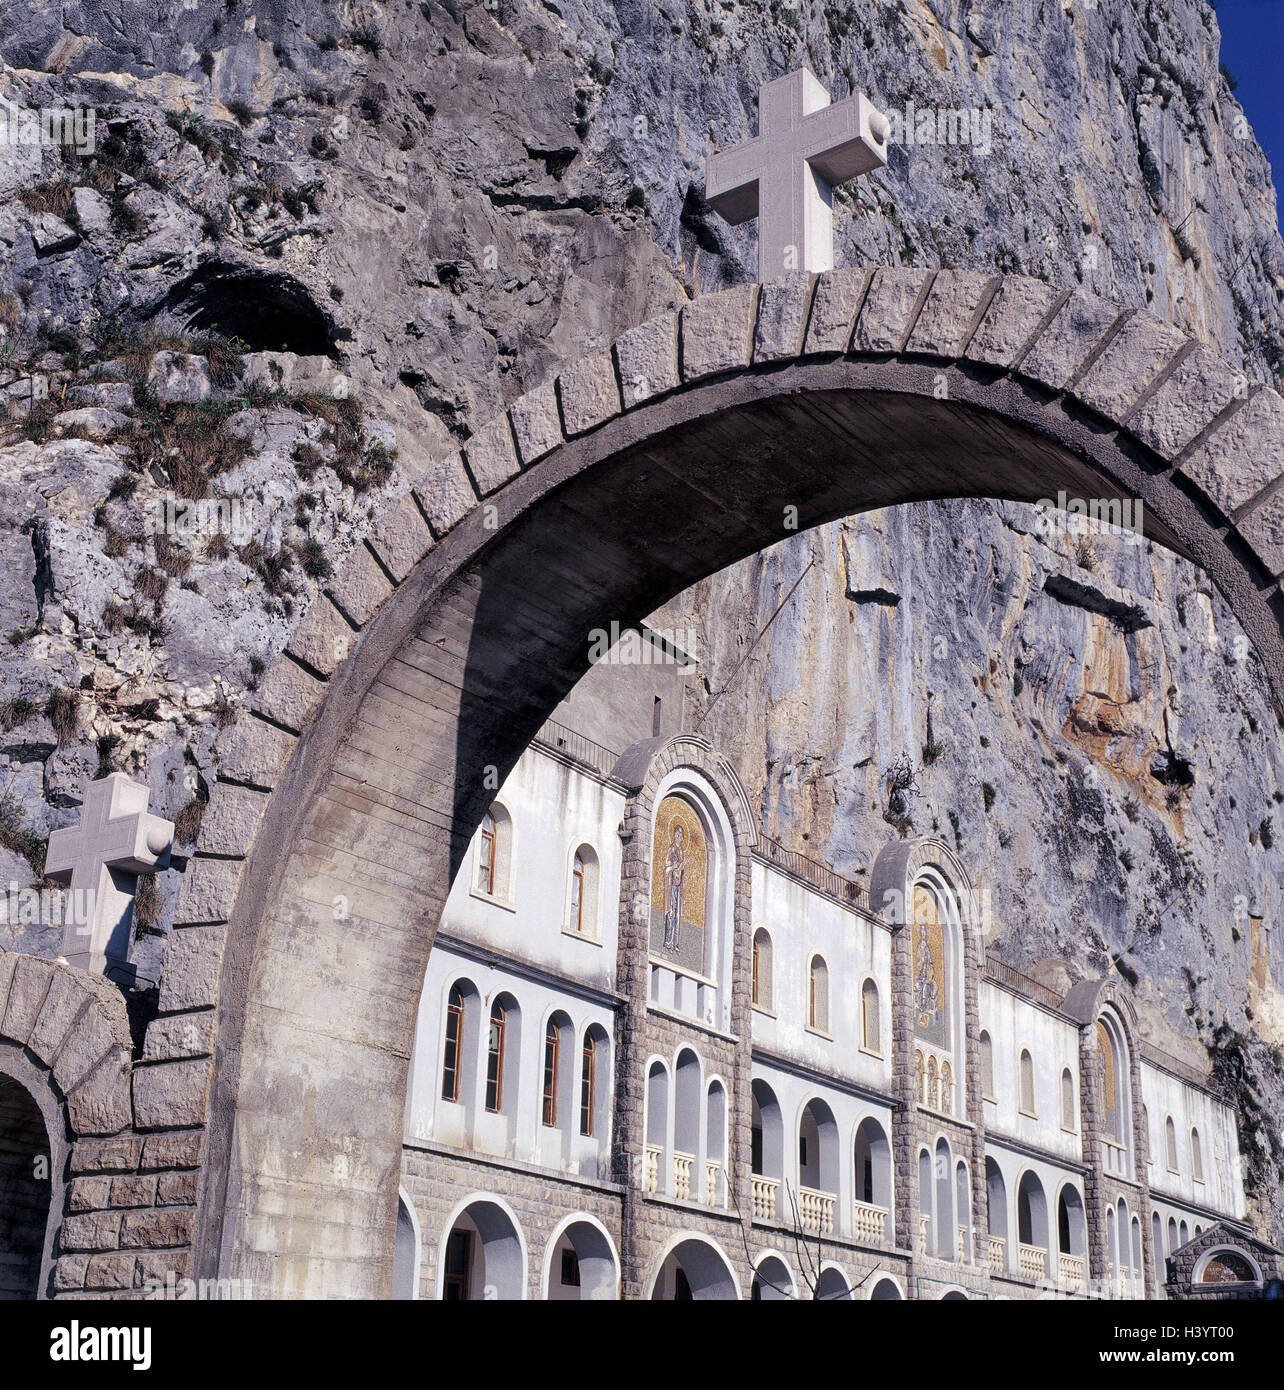 Montenegro, Zeta valley, cliff face, round arch, view, cloister Ostrog, detail, mountains, mountain, bile, buildings, cloister buildings, 900 m high, structure, place of interest, culture, faith, religion, seclusion, loneliness Stock Photo